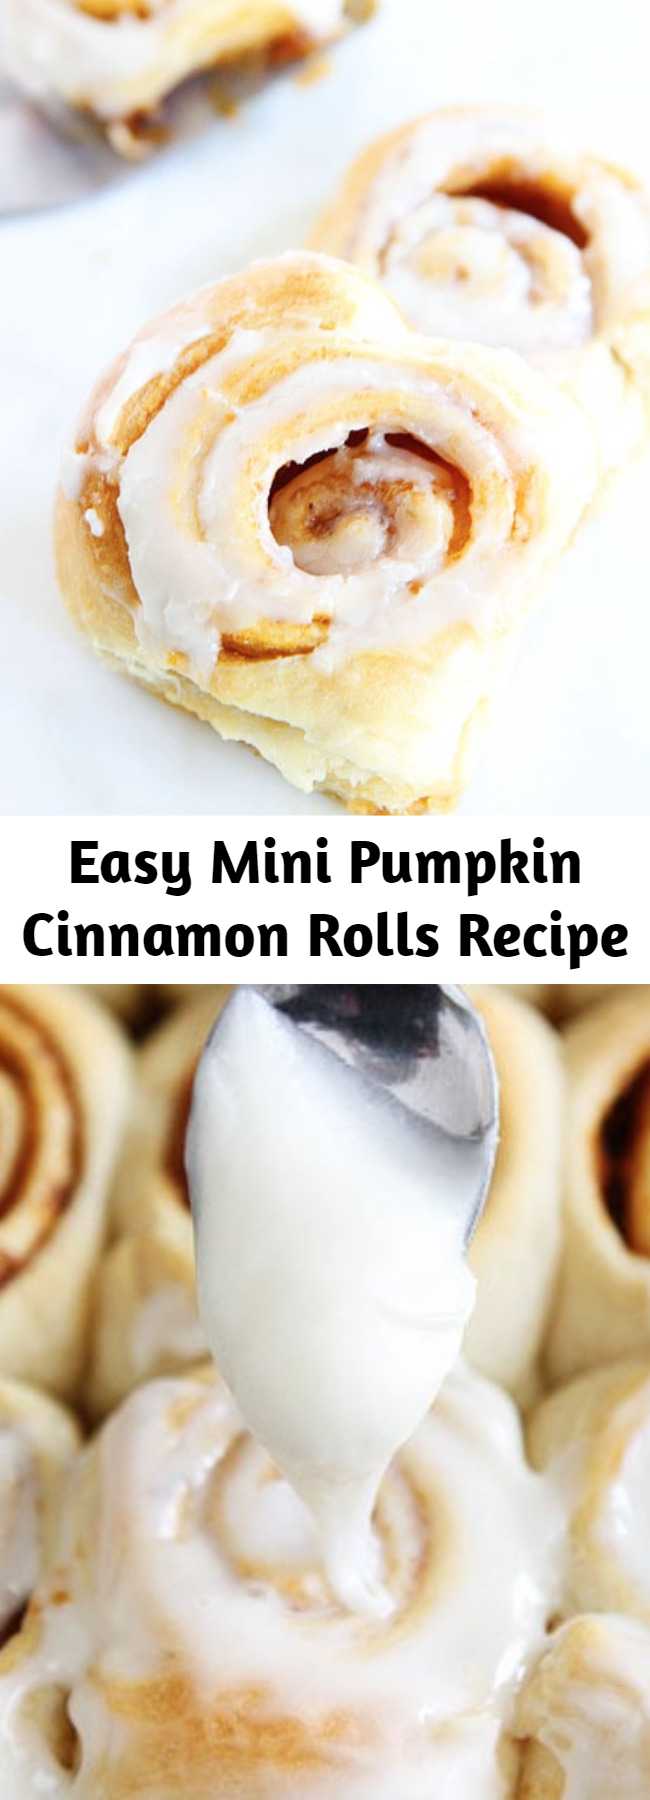 Easy Mini Pumpkin Cinnamon Rolls Recipe - Mini cinnamon rolls made with pumpkin butter and cream cheese frosting! The best part? They take less than 30 minutes to make!